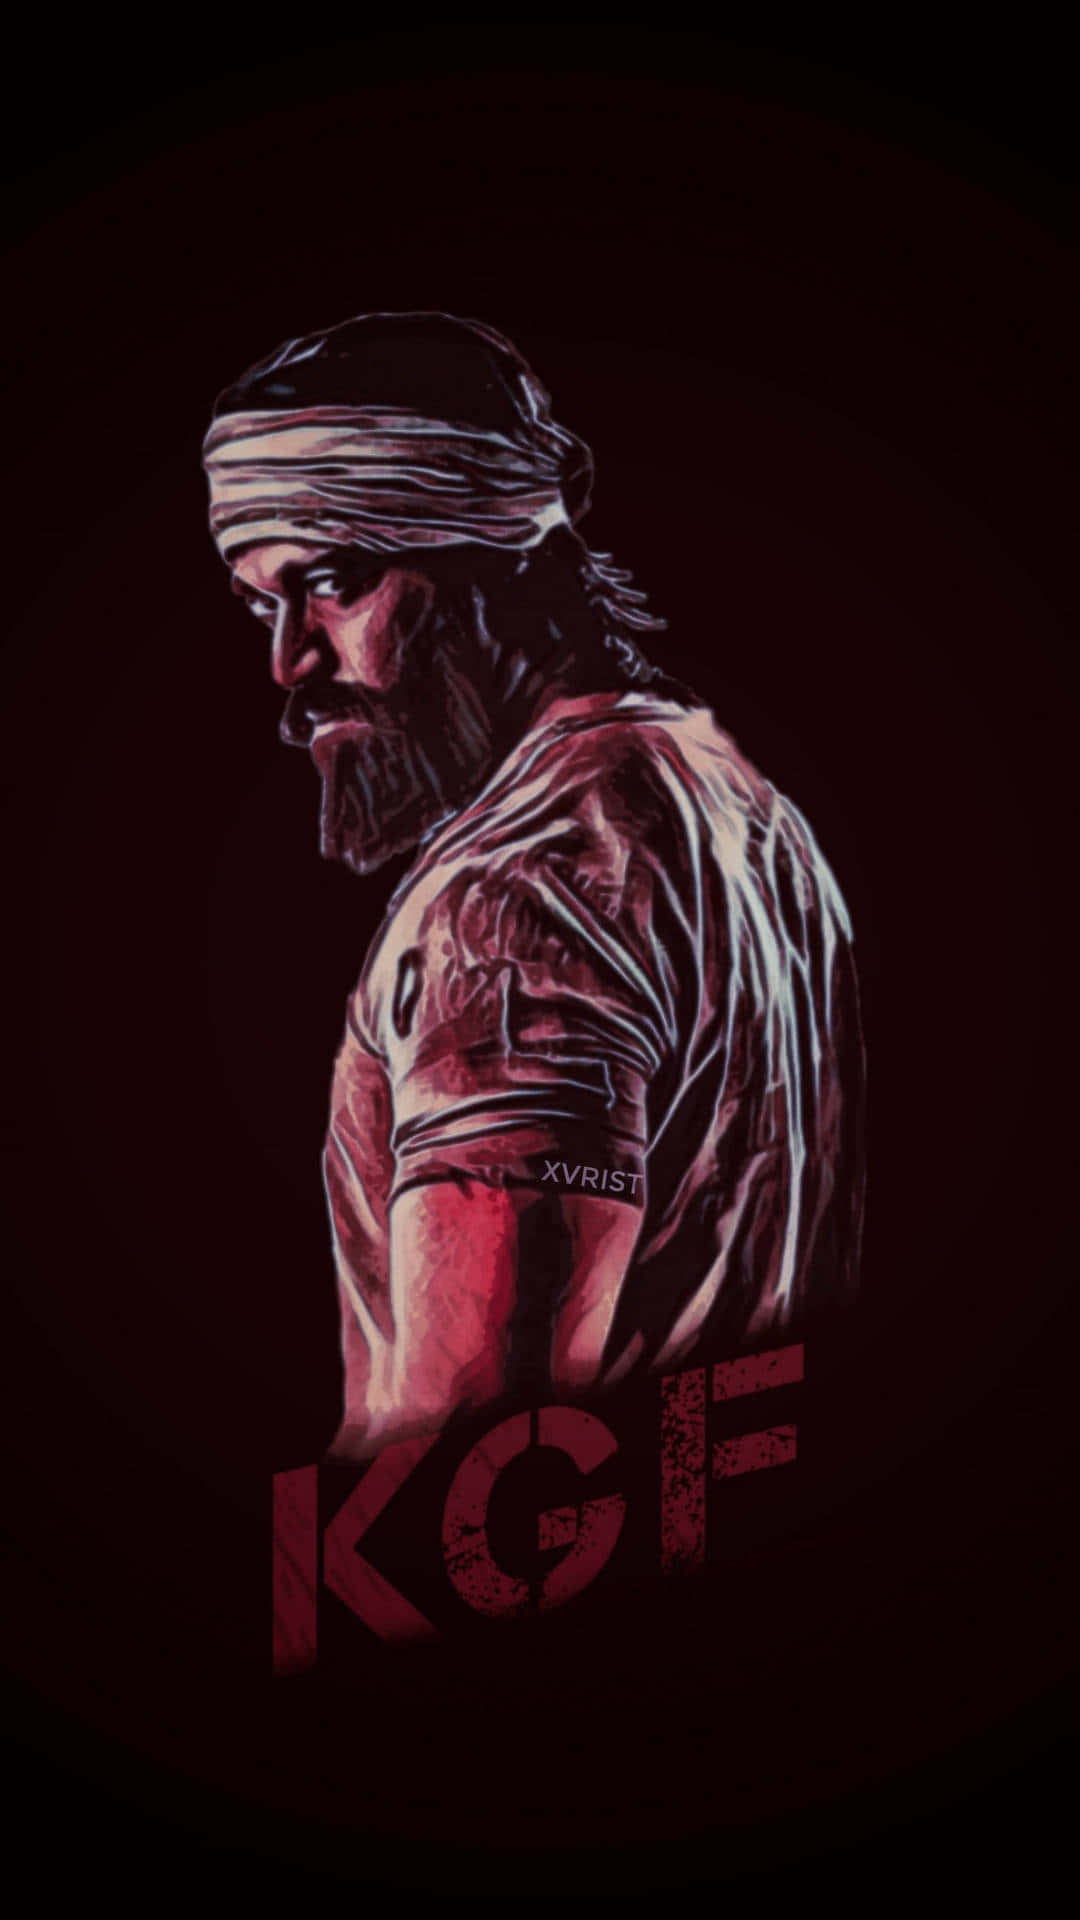 "Rocking the looks in KGF 2"